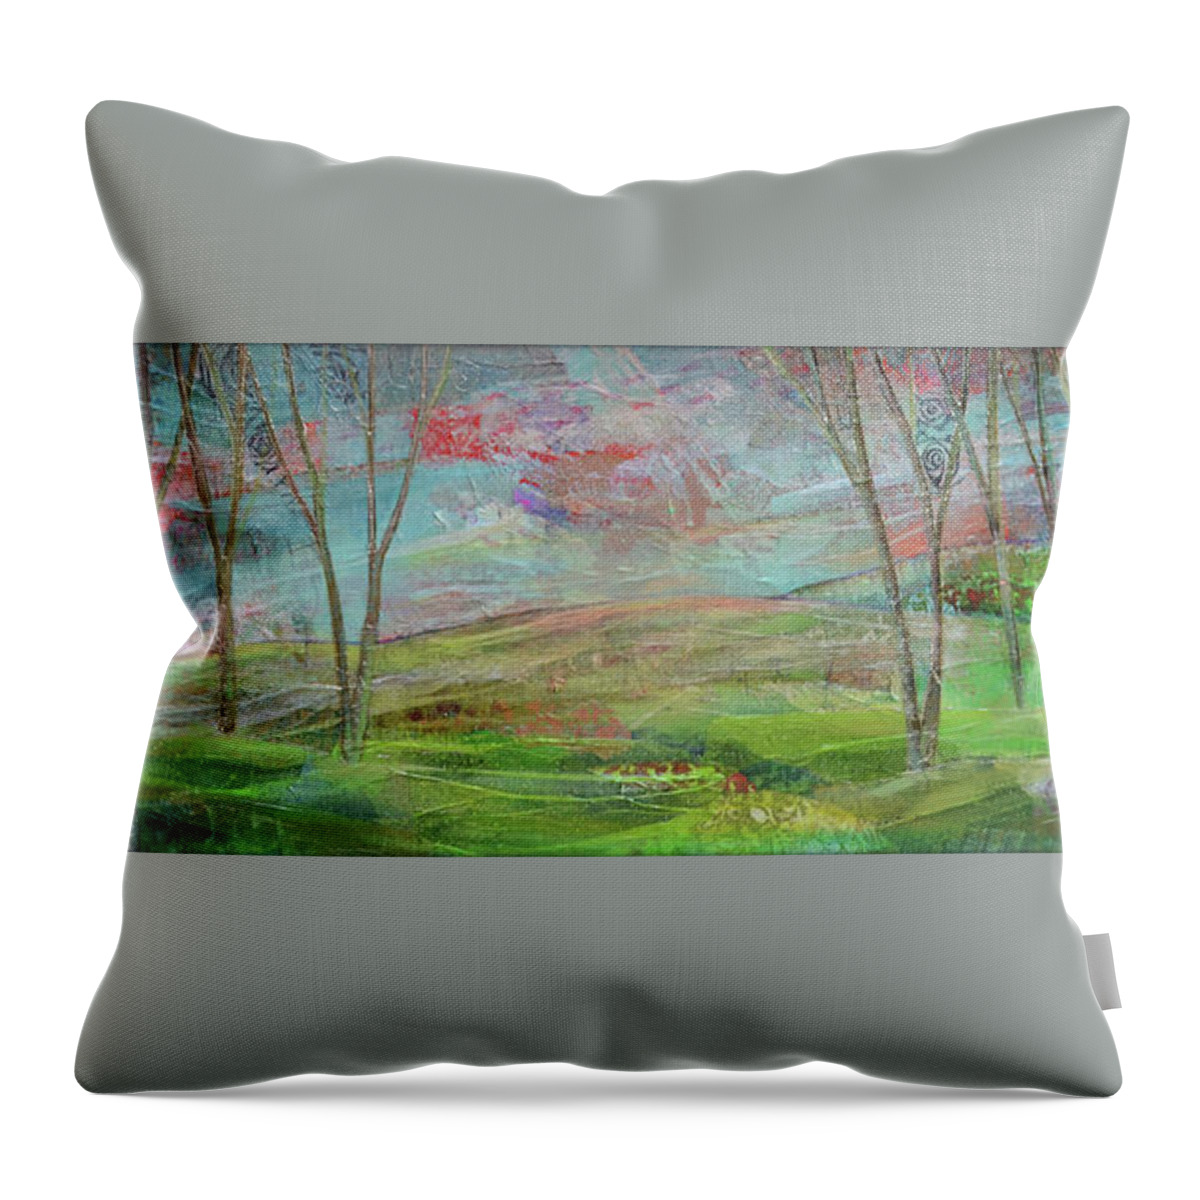 Michigan Throw Pillow featuring the painting Dreaming Trees by Shadia Derbyshire